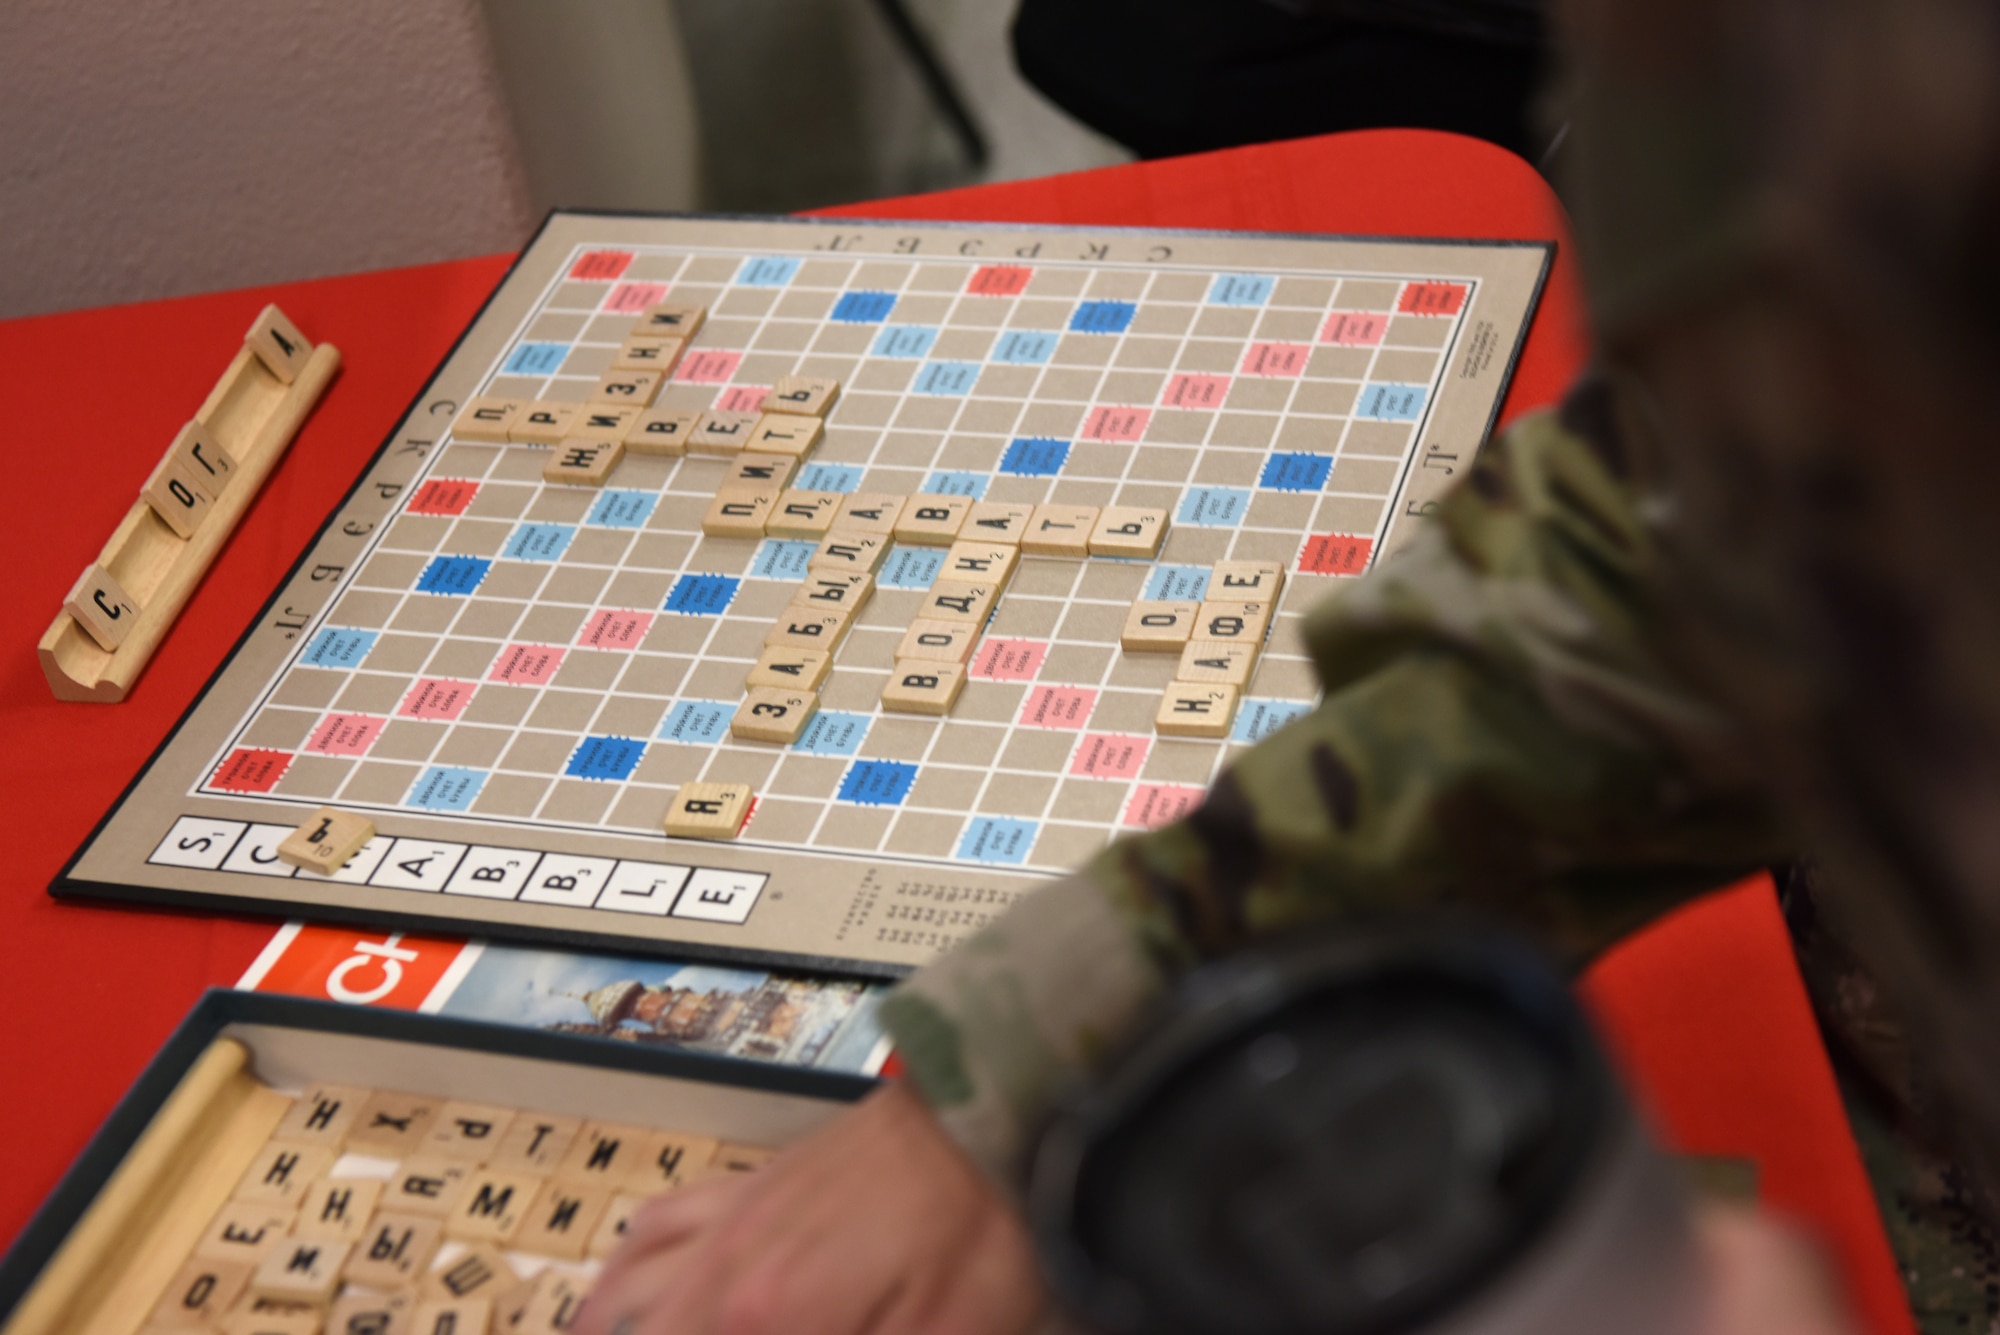 Members of the 17th Training Wing play word games using the Cyrillic alphabet at the Angelo State University and Goodfellow AFB Language and Culture Fair, April 26, 2022, San Angelo, Texas. The attendees learned about different languages and they experienced different cultures from where that language was spoken. (U.S. Air Force photo by Senior Airman Michael Bowman)